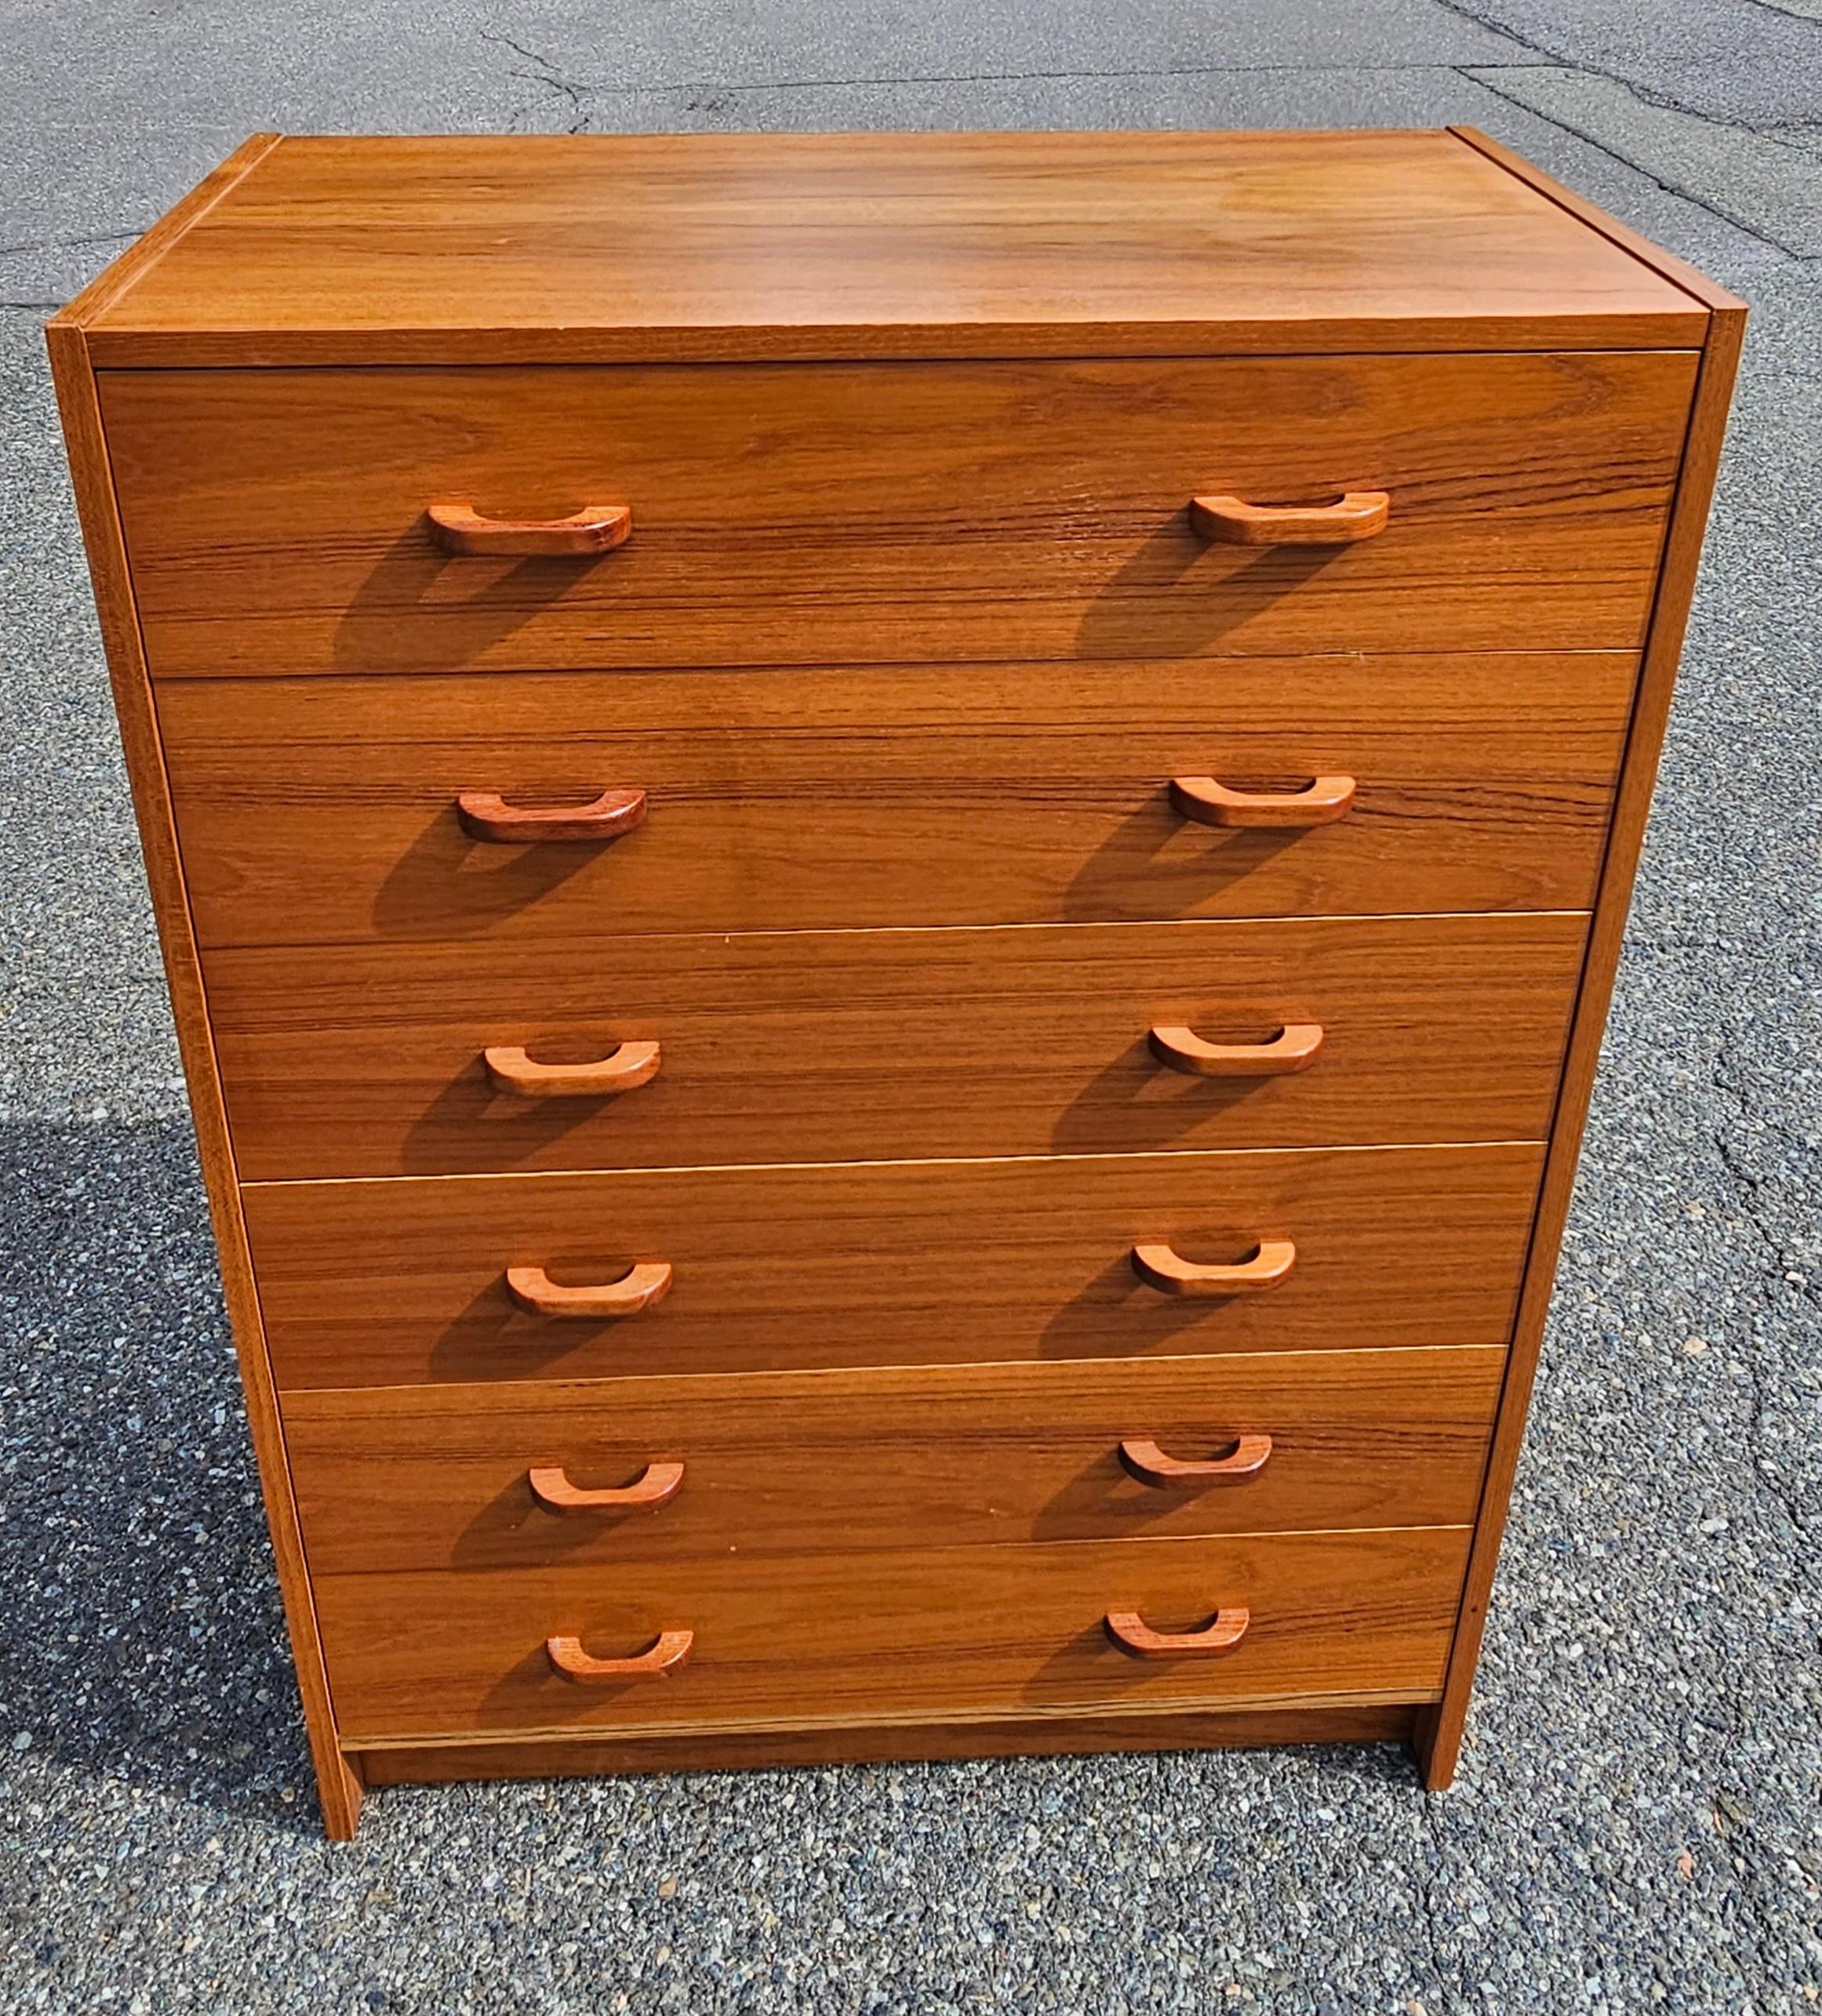 Late 20th Century Danish Modern Teak Chest of Drawers For Sale 1